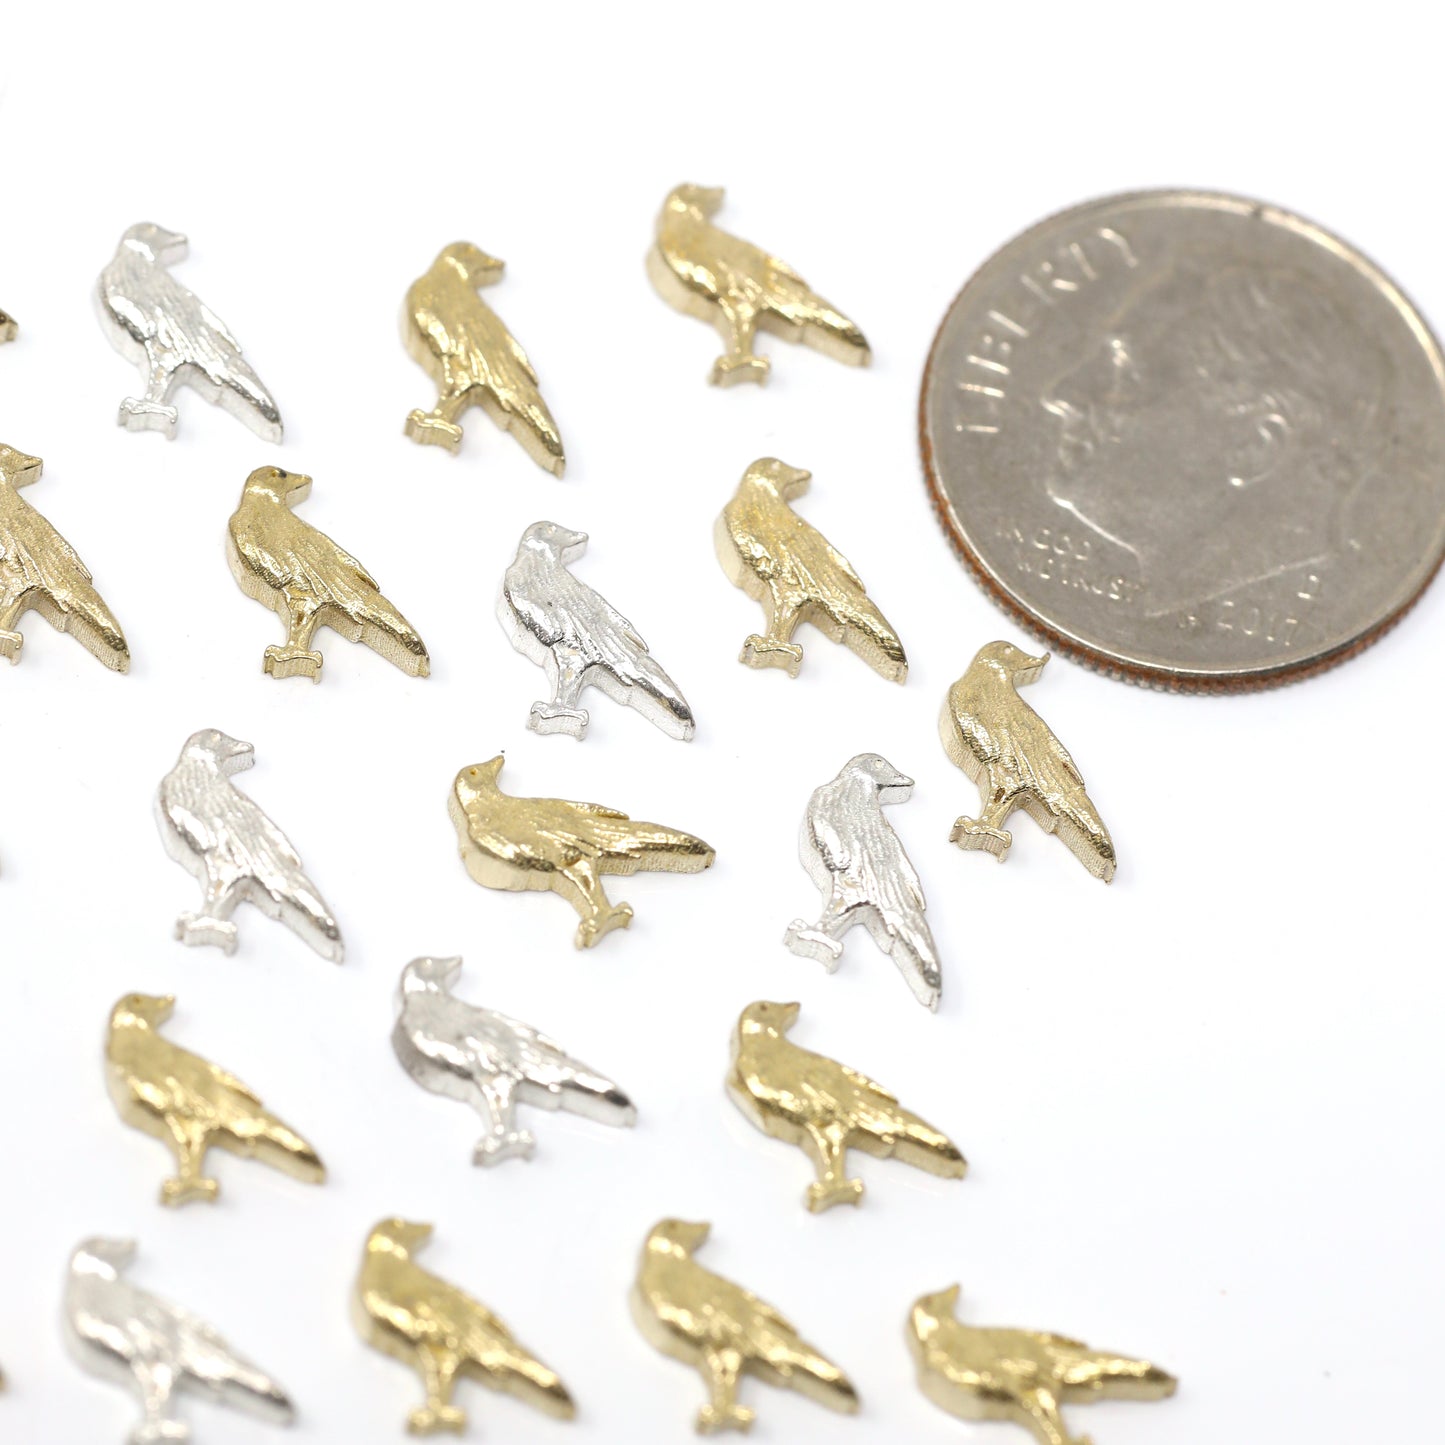 Raven Bird Accent Charm Embellishments for Soldering or Jewelry Making